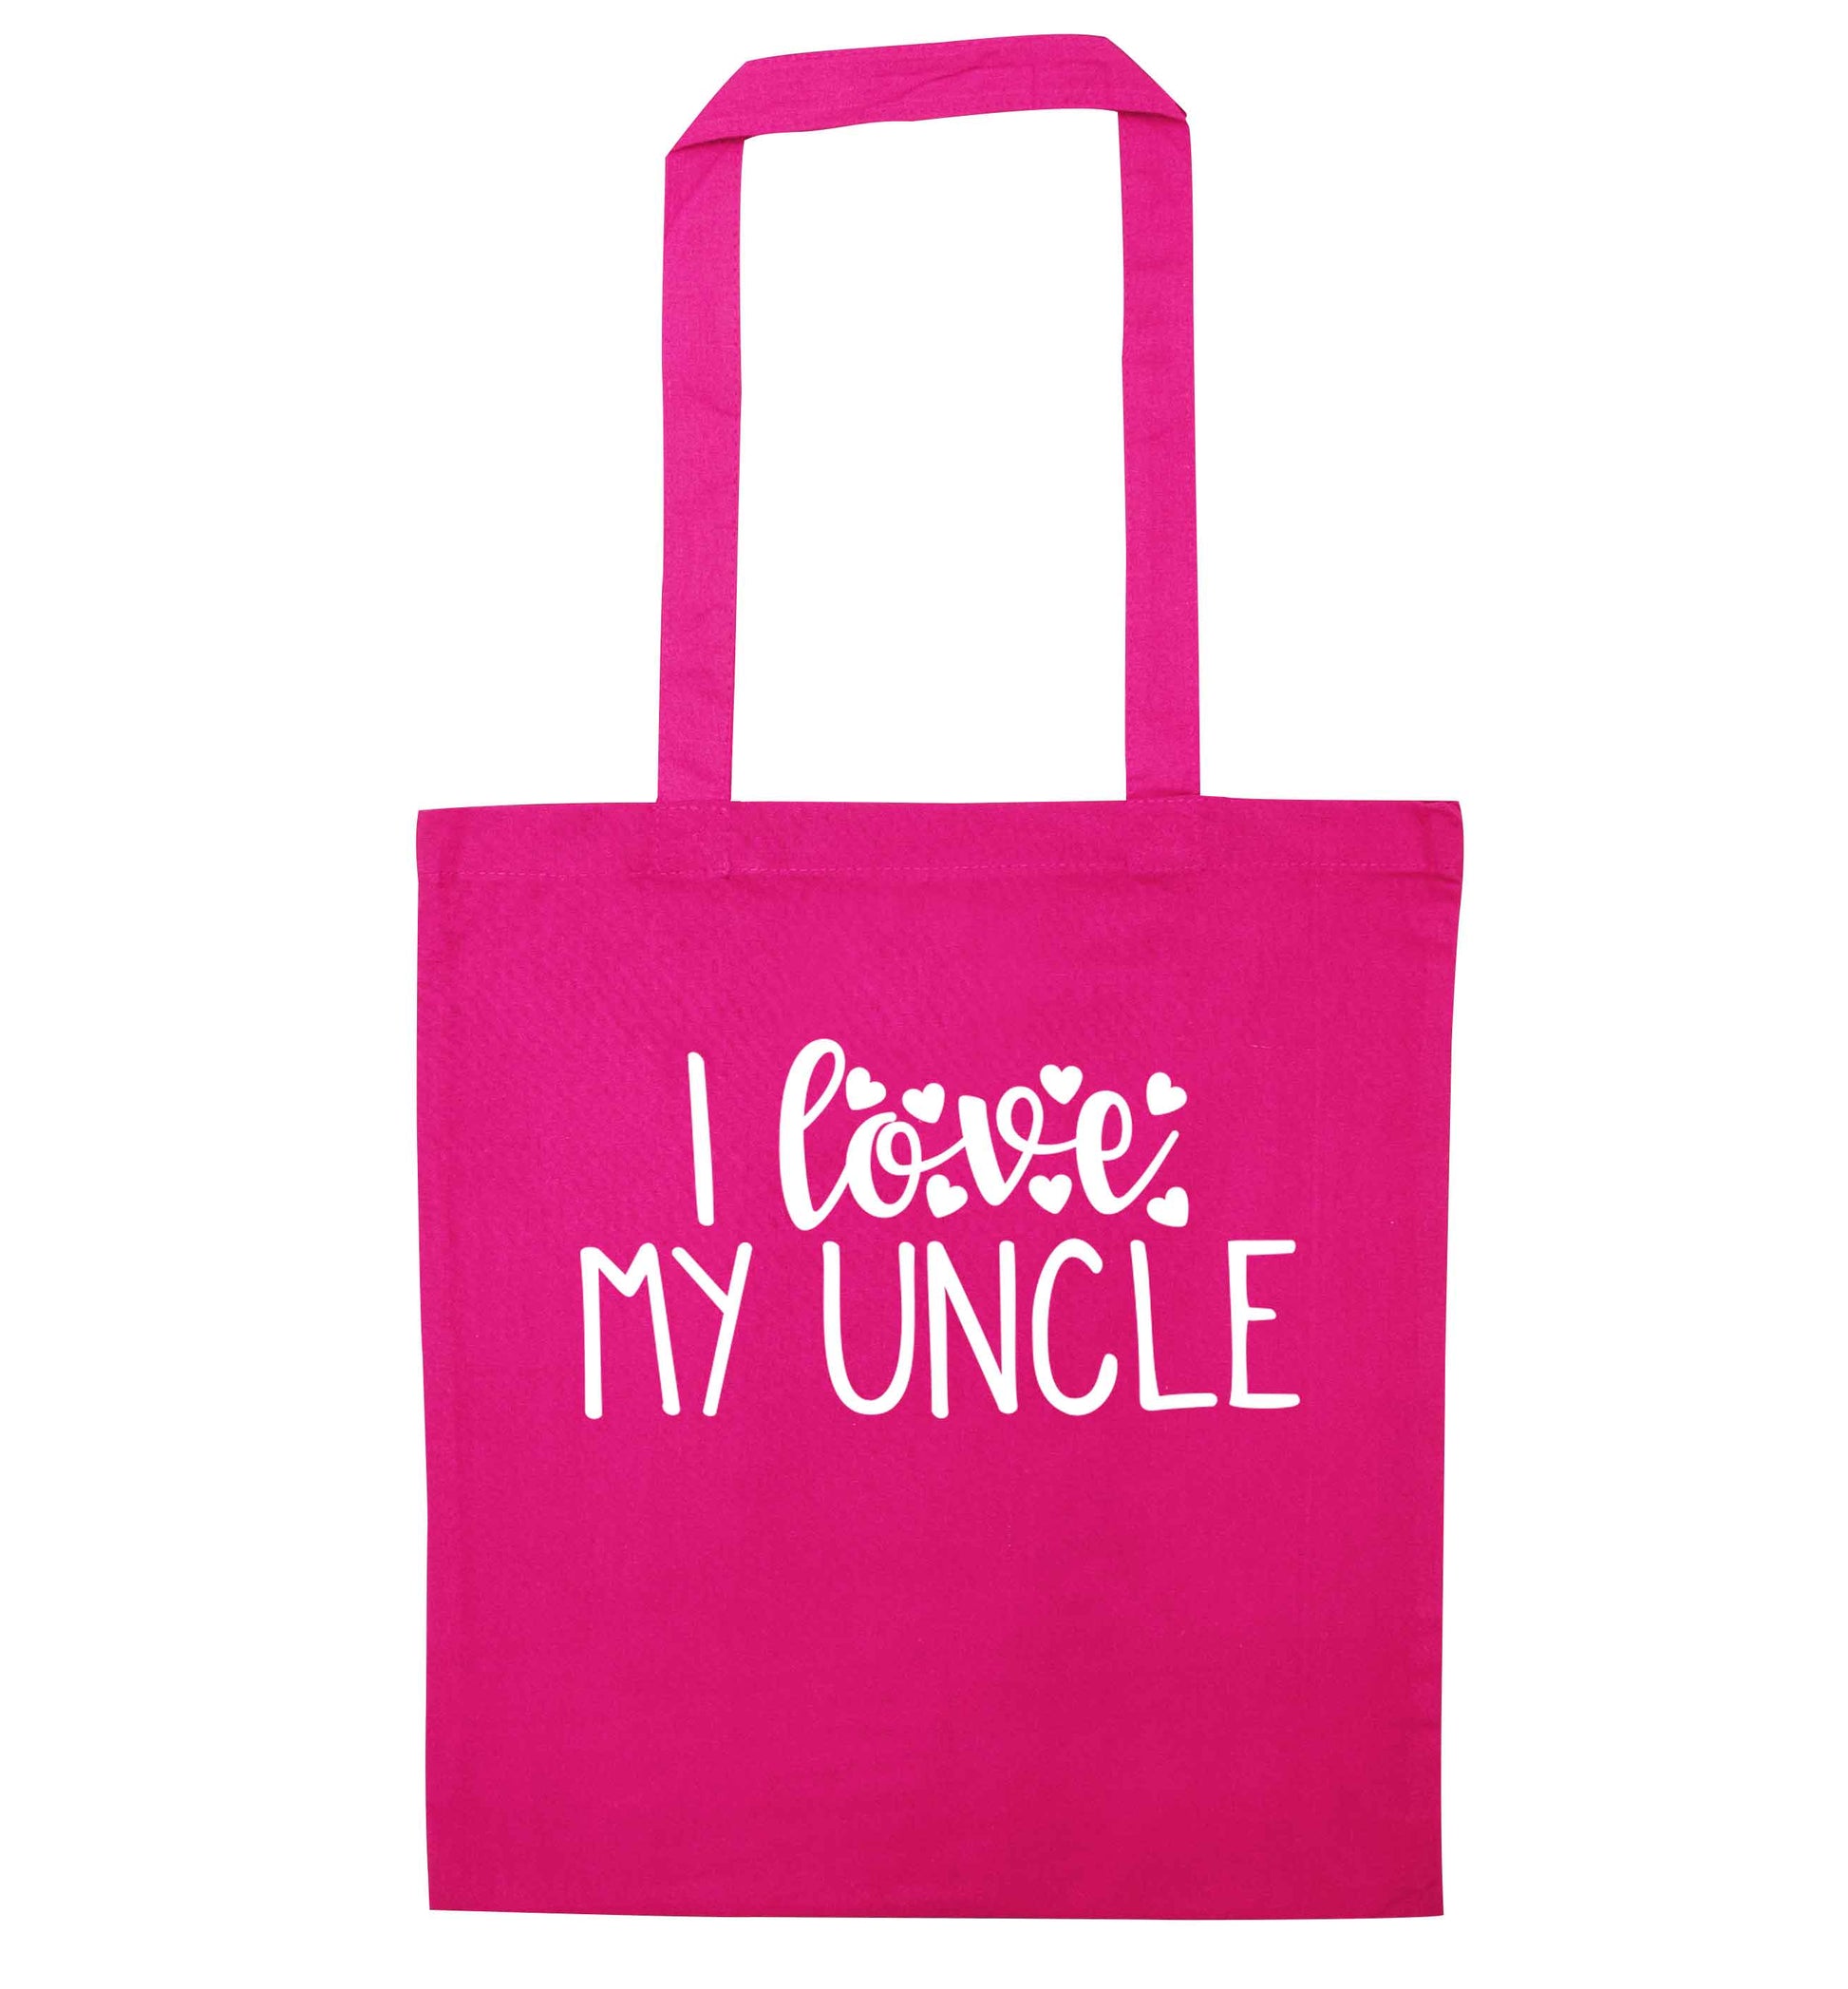 I love my uncle pink tote bag